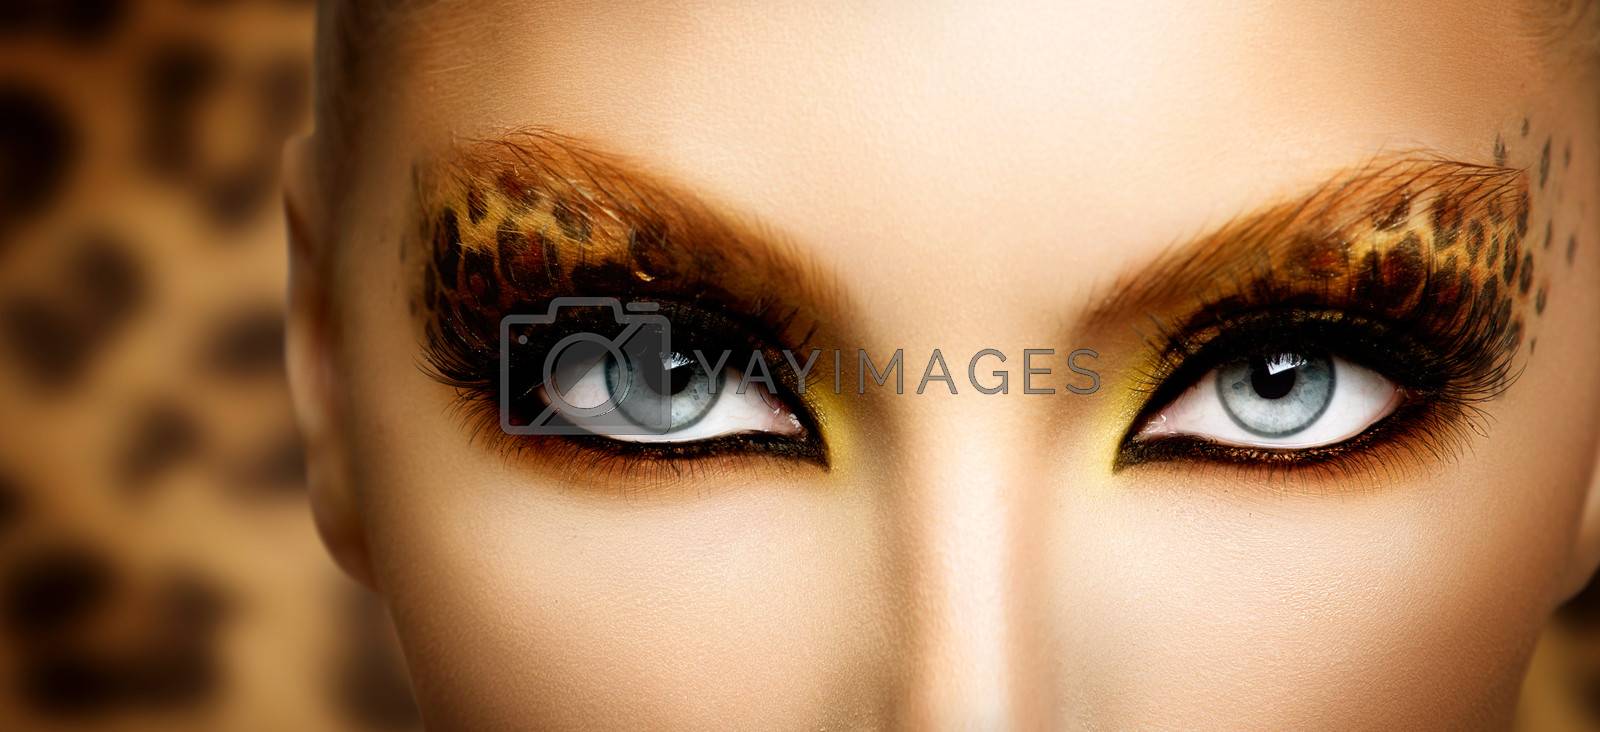 Royalty free image of Beauty Fashion Model Girl with Holiday Leopard Makeup by SubbotinaA